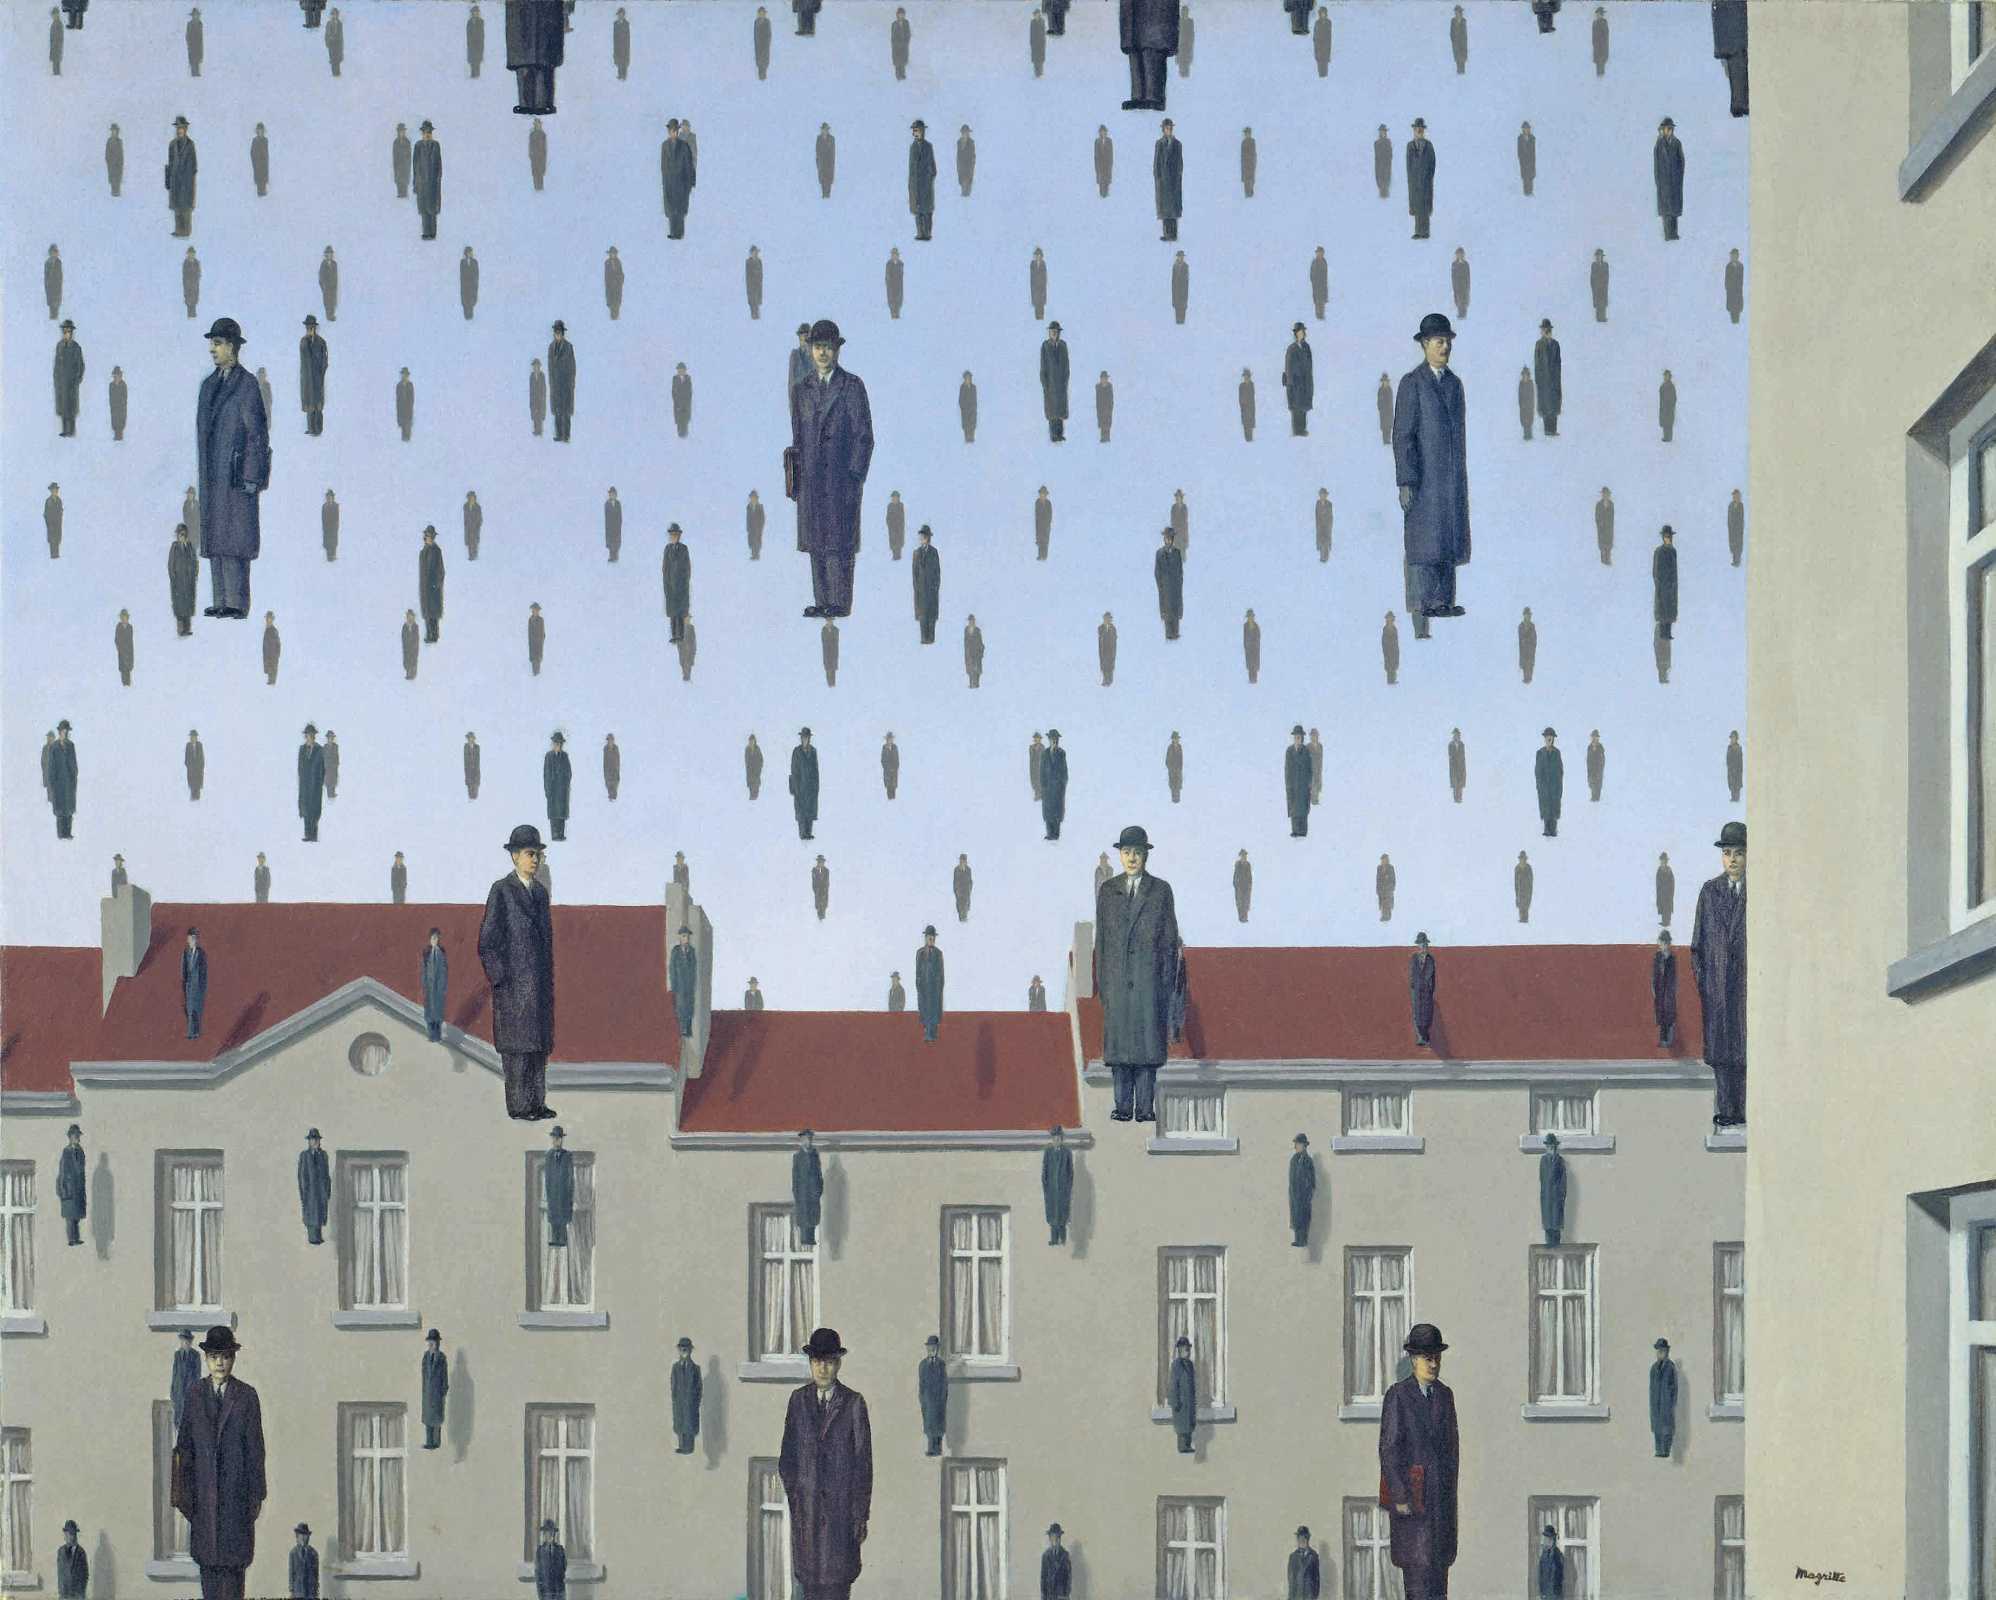 Find out more about René Magritte - Golconda